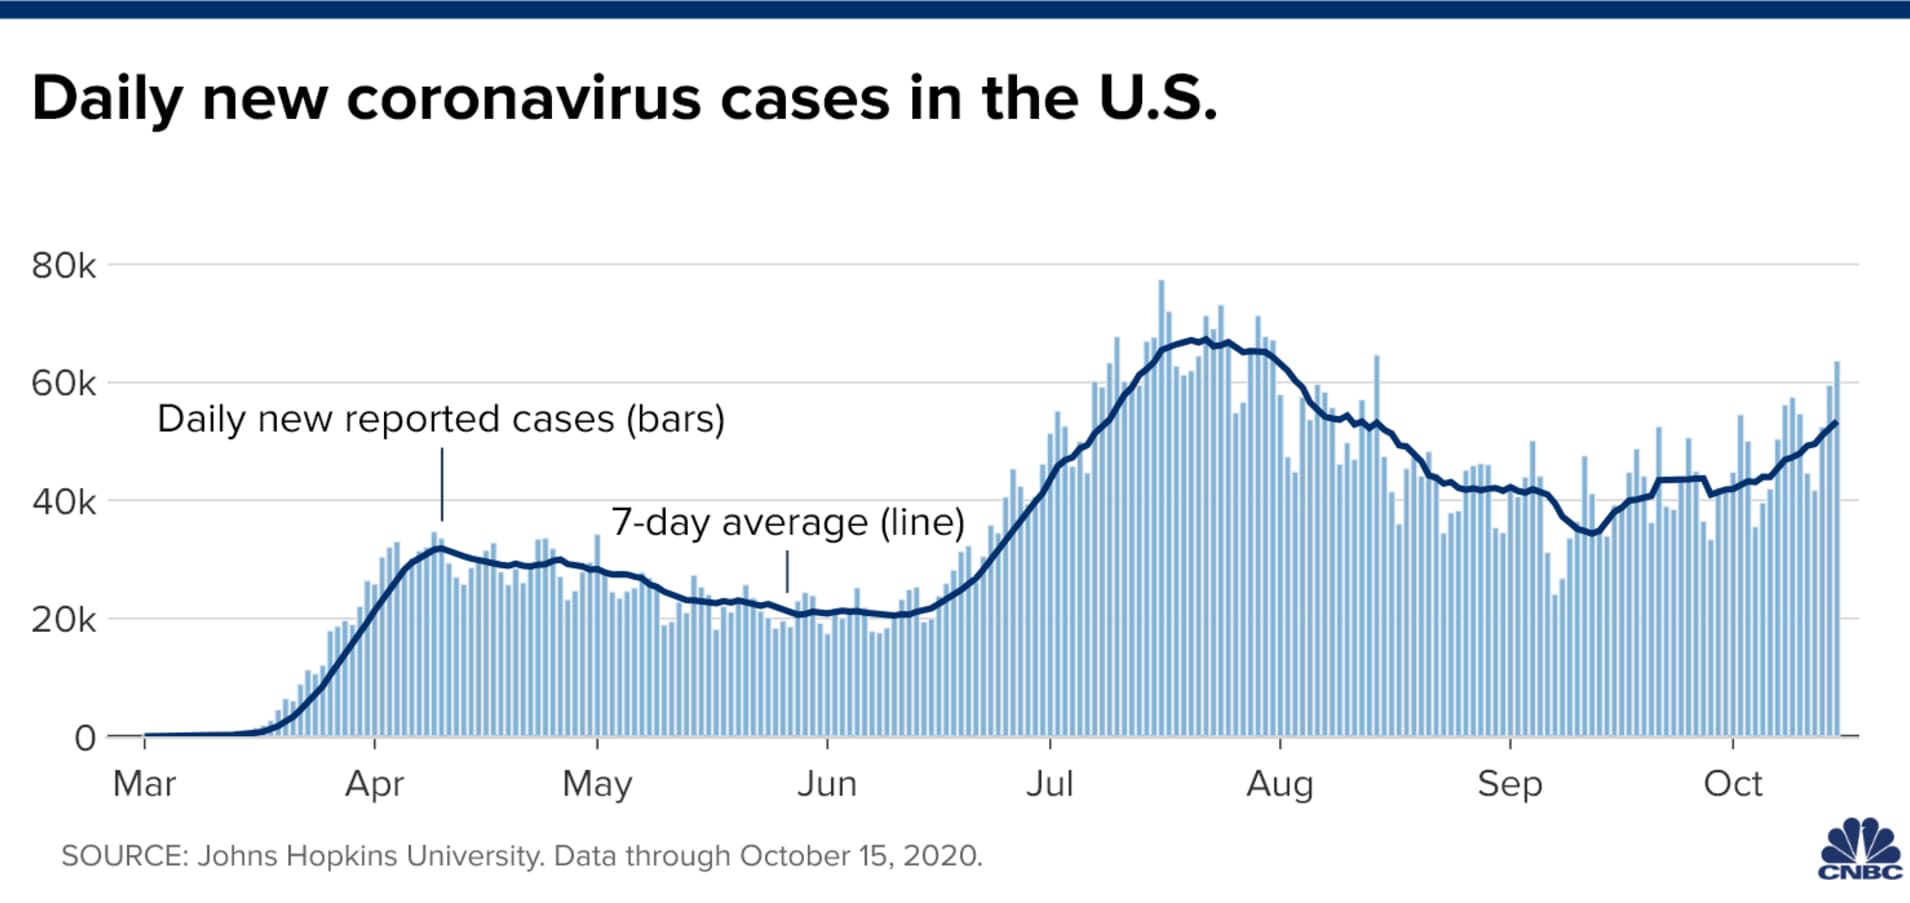 Chart showing daily new coronavirus cases in the U.S. with data through October 15, 2020.